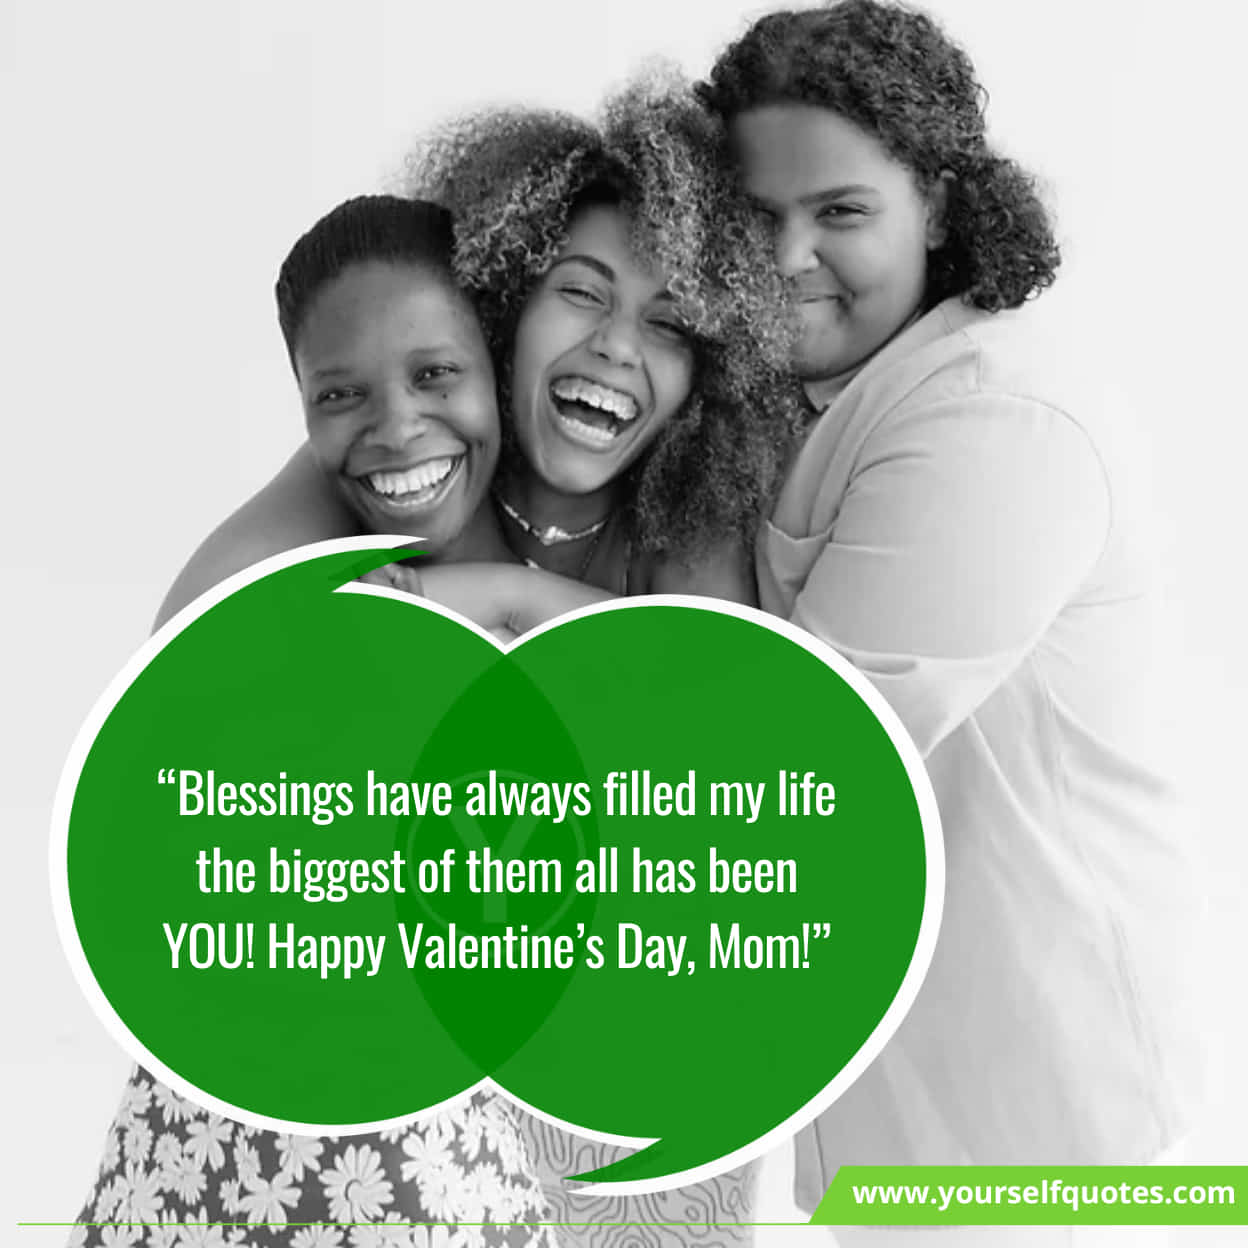 Emotional Message For Mom On Valentine's Day